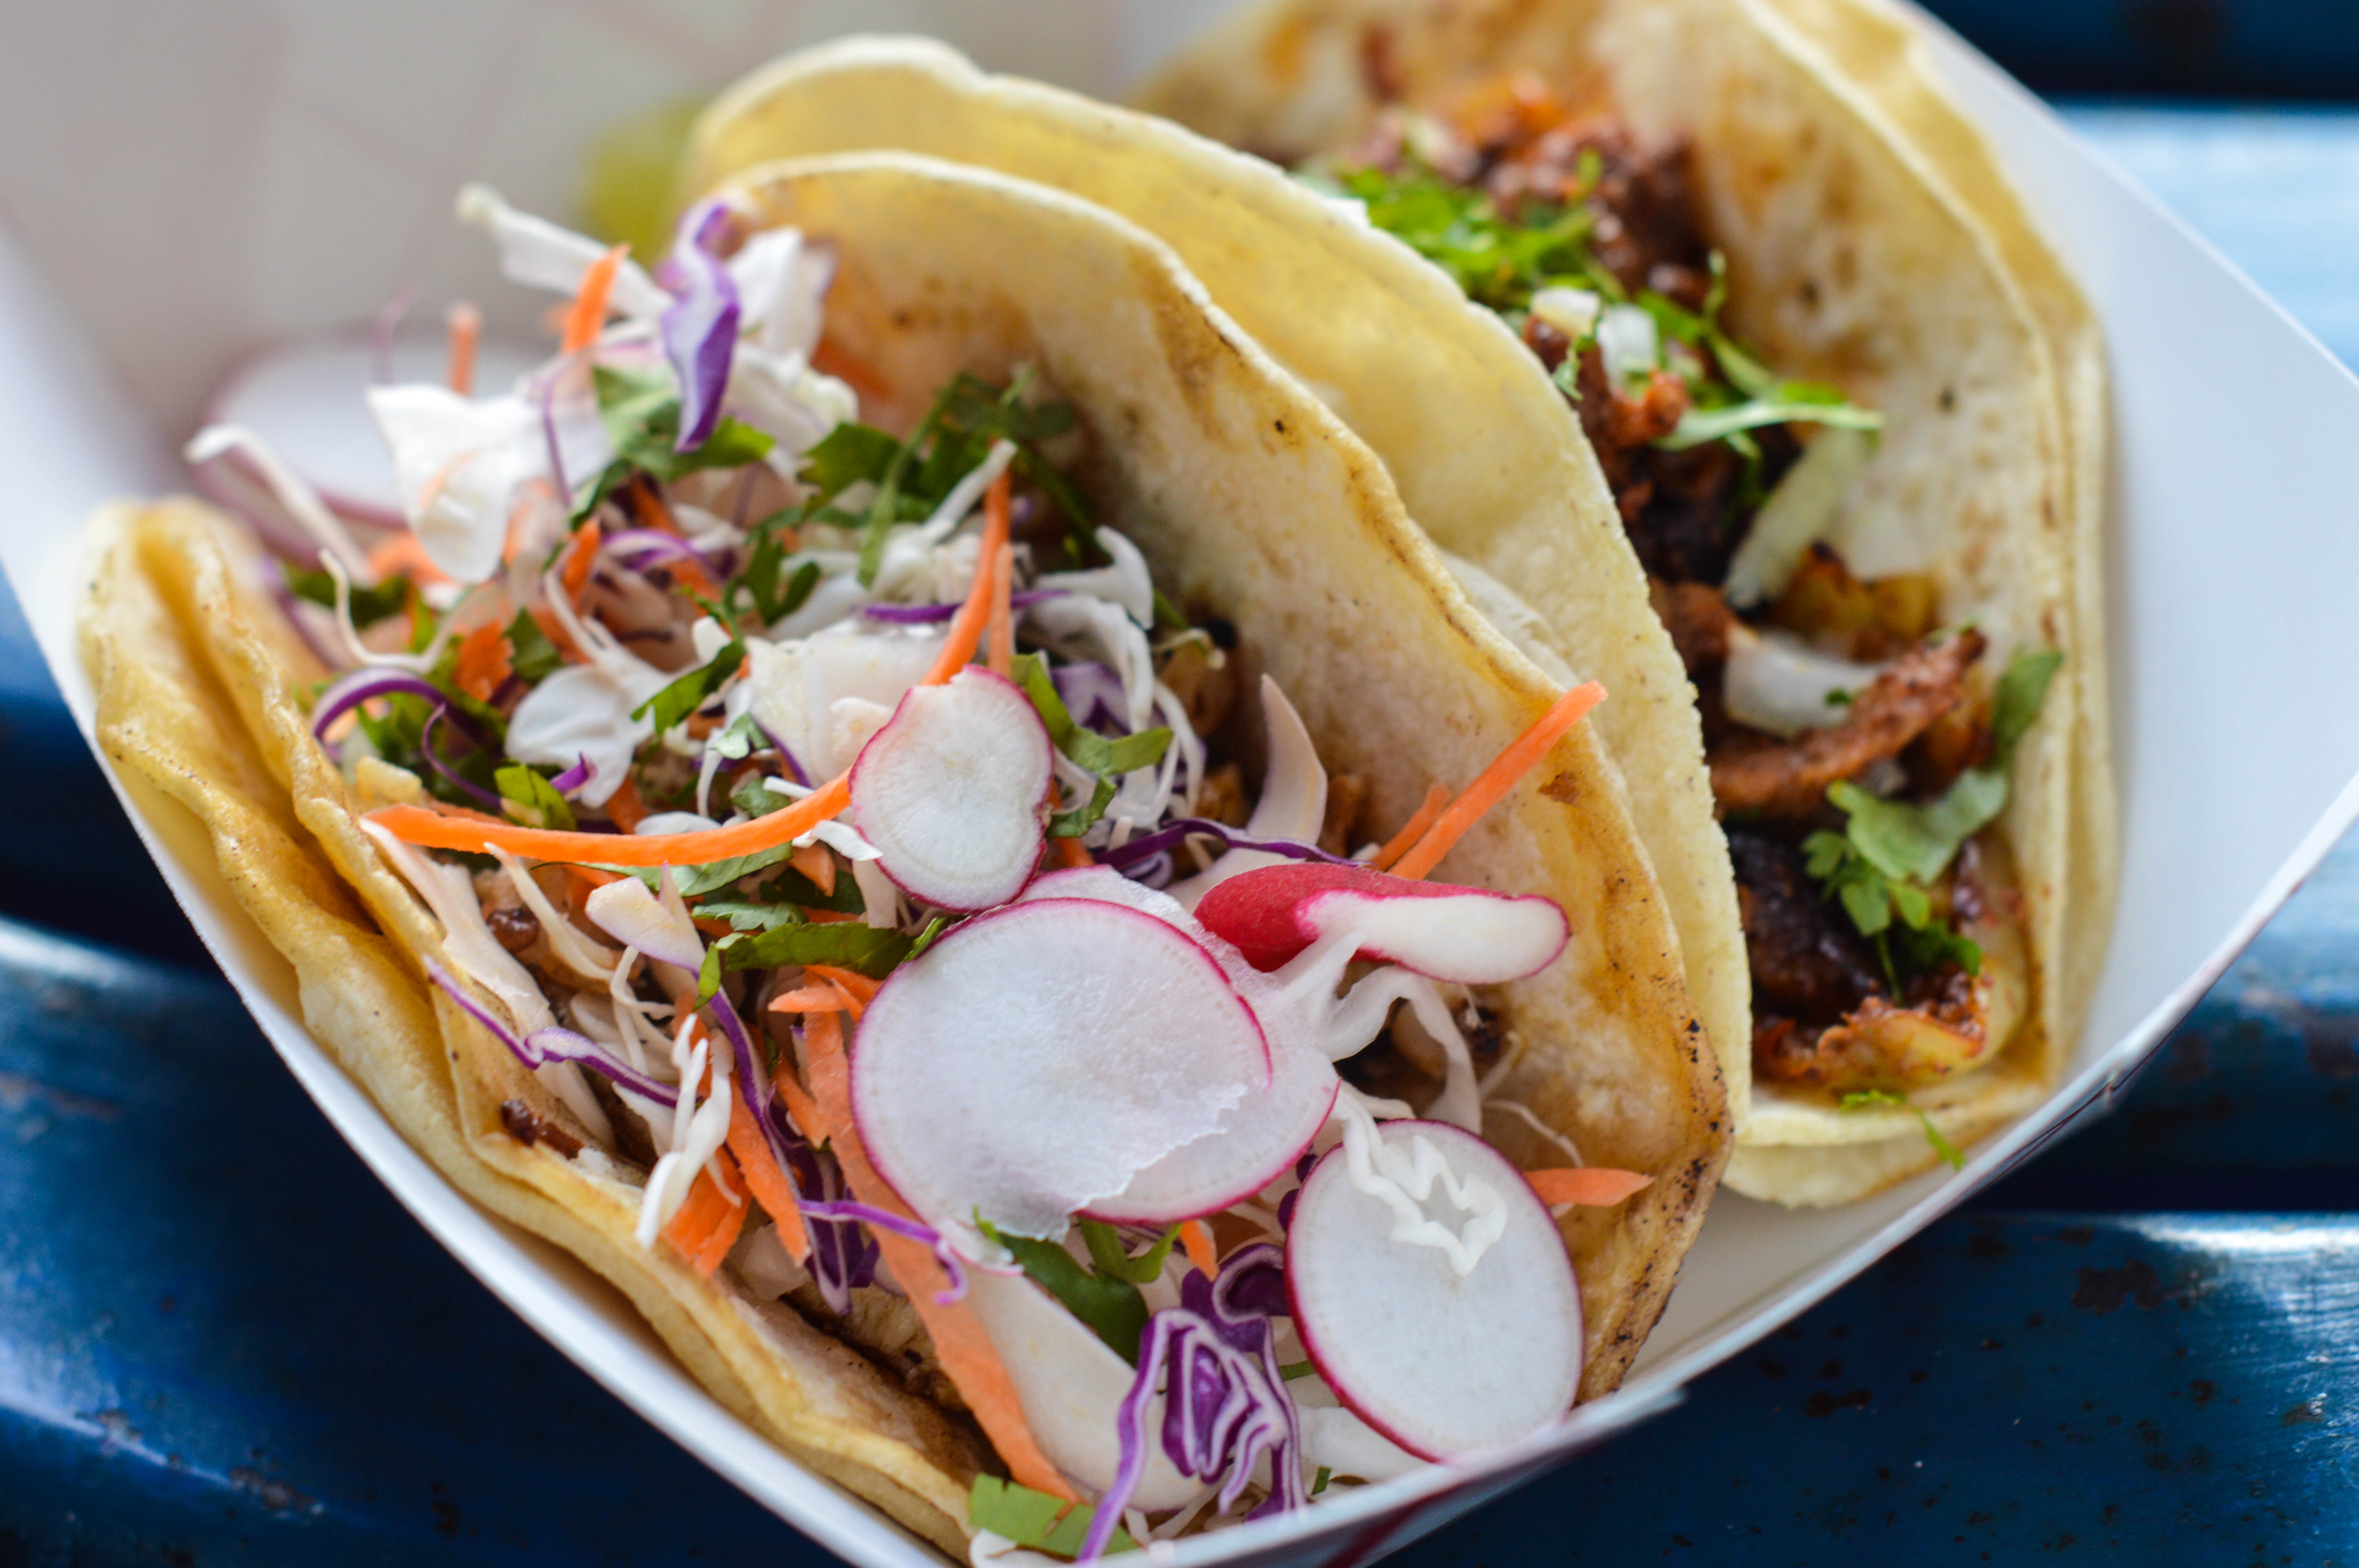 Two tacos loaded with meat and fresh veggies in a to-go basket.